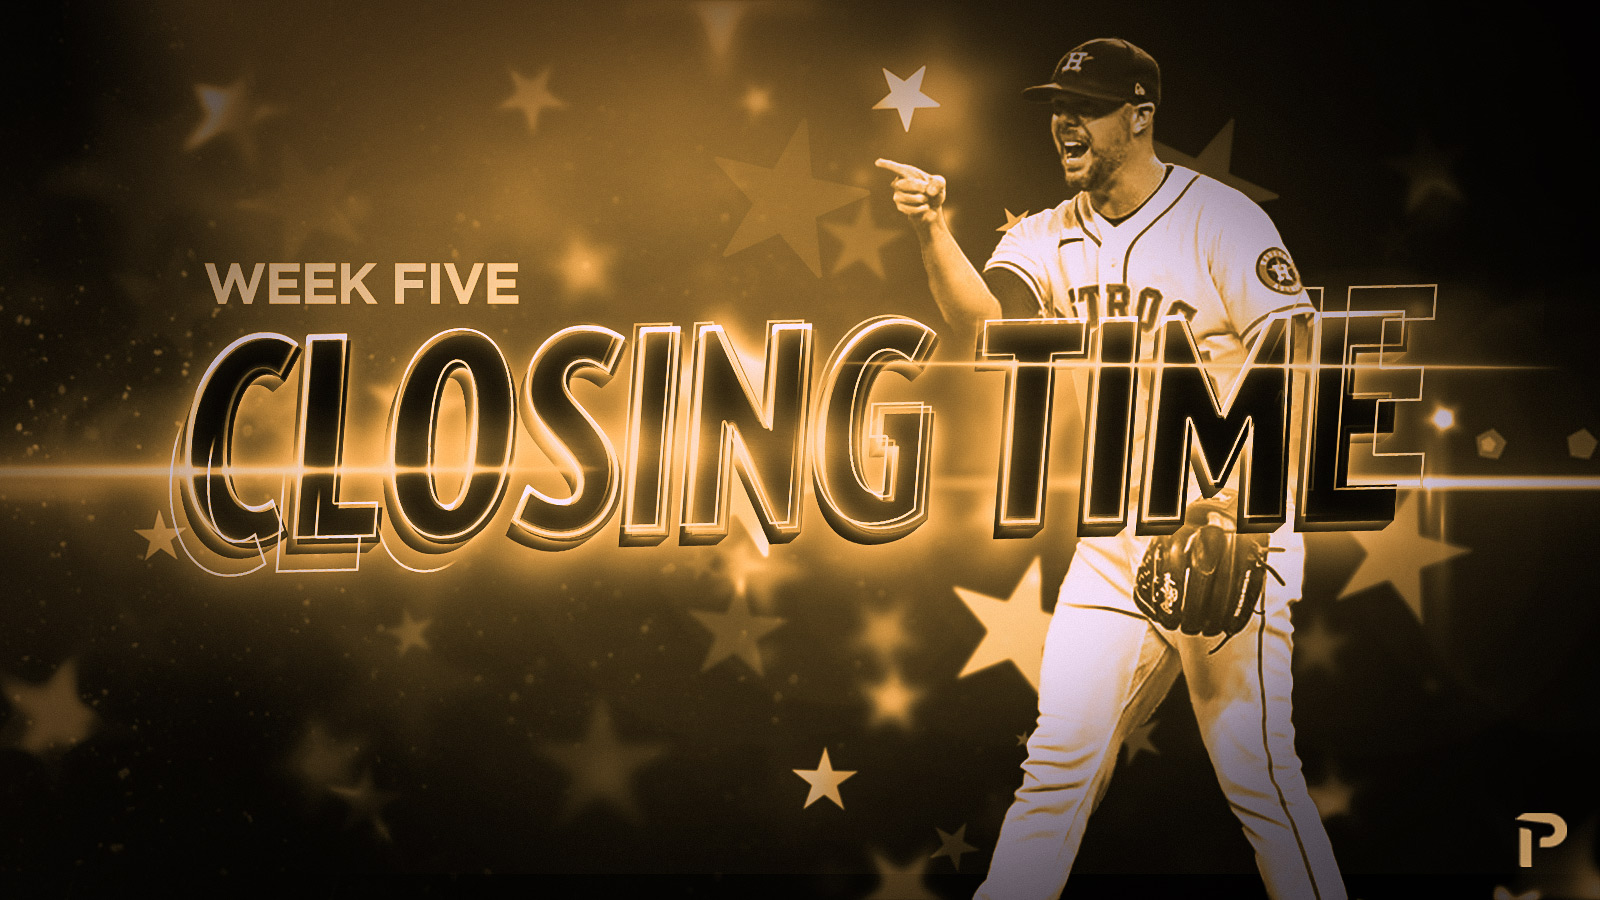 Closing Time 5/25: Ranking the Top 30 Closers Every Tuesday